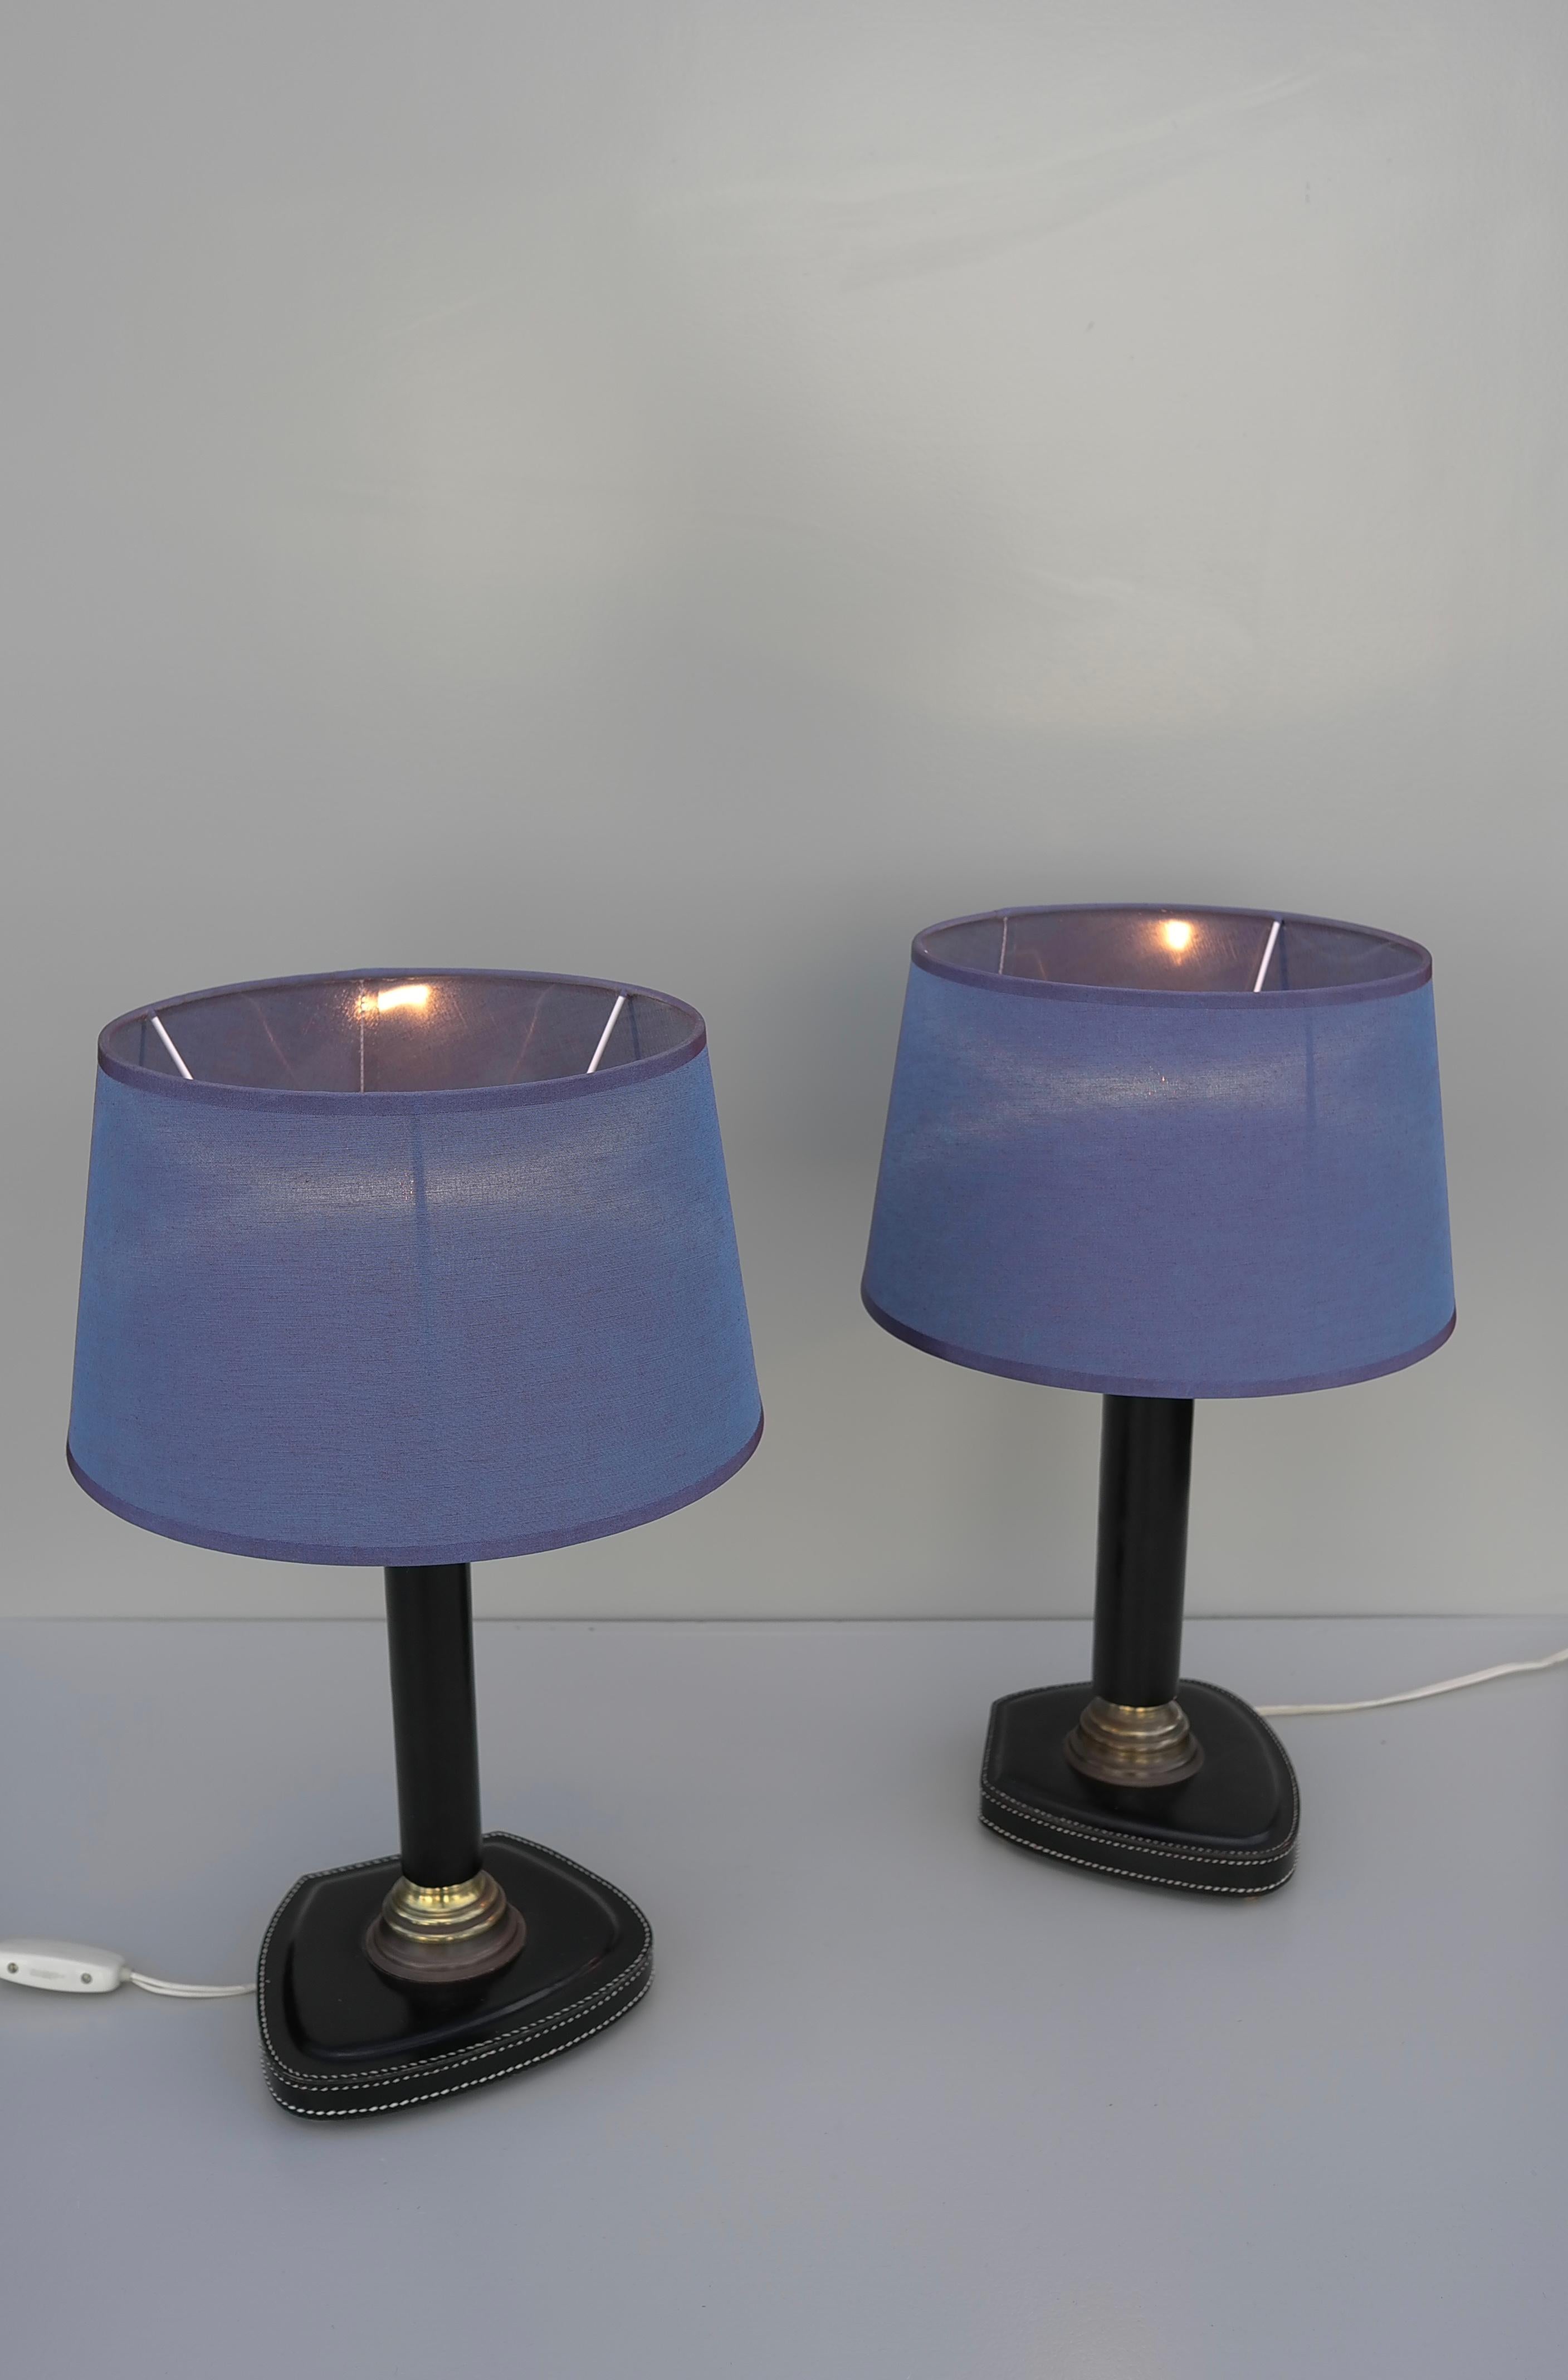 Pair of Hand-Stitched Black Leather Table Lamps, France, 1960s In Good Condition For Sale In Den Haag, NL